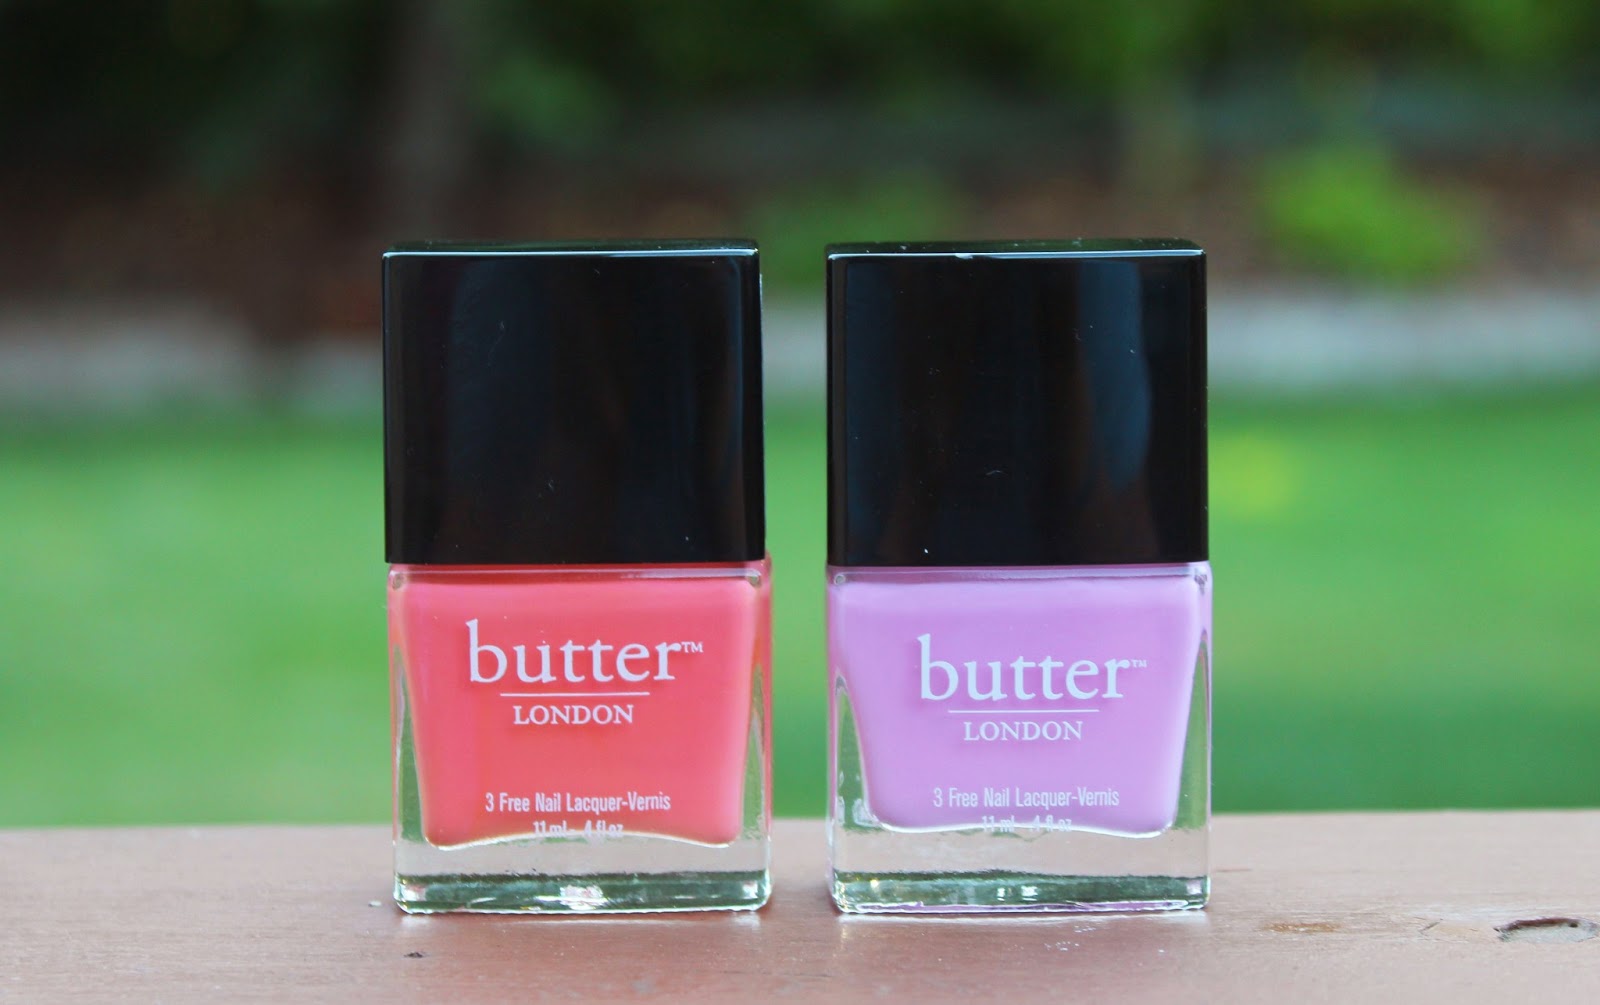 7. Butter London Nail Lacquer in "Strawberry Fields" - wide 8